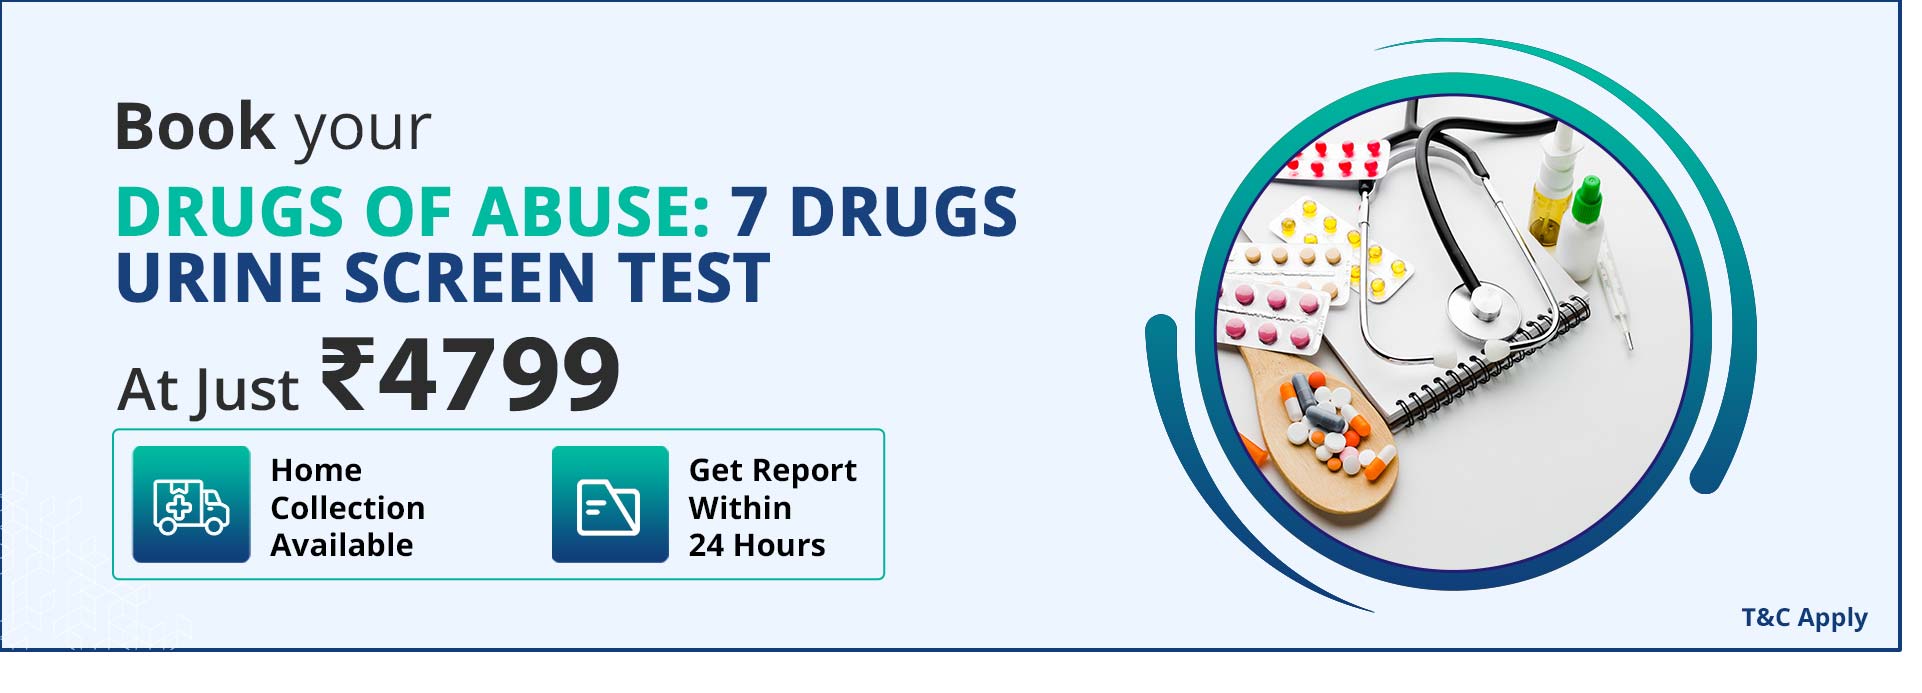 Drugs of Abuse: 7 Drugs Urine Screen Test